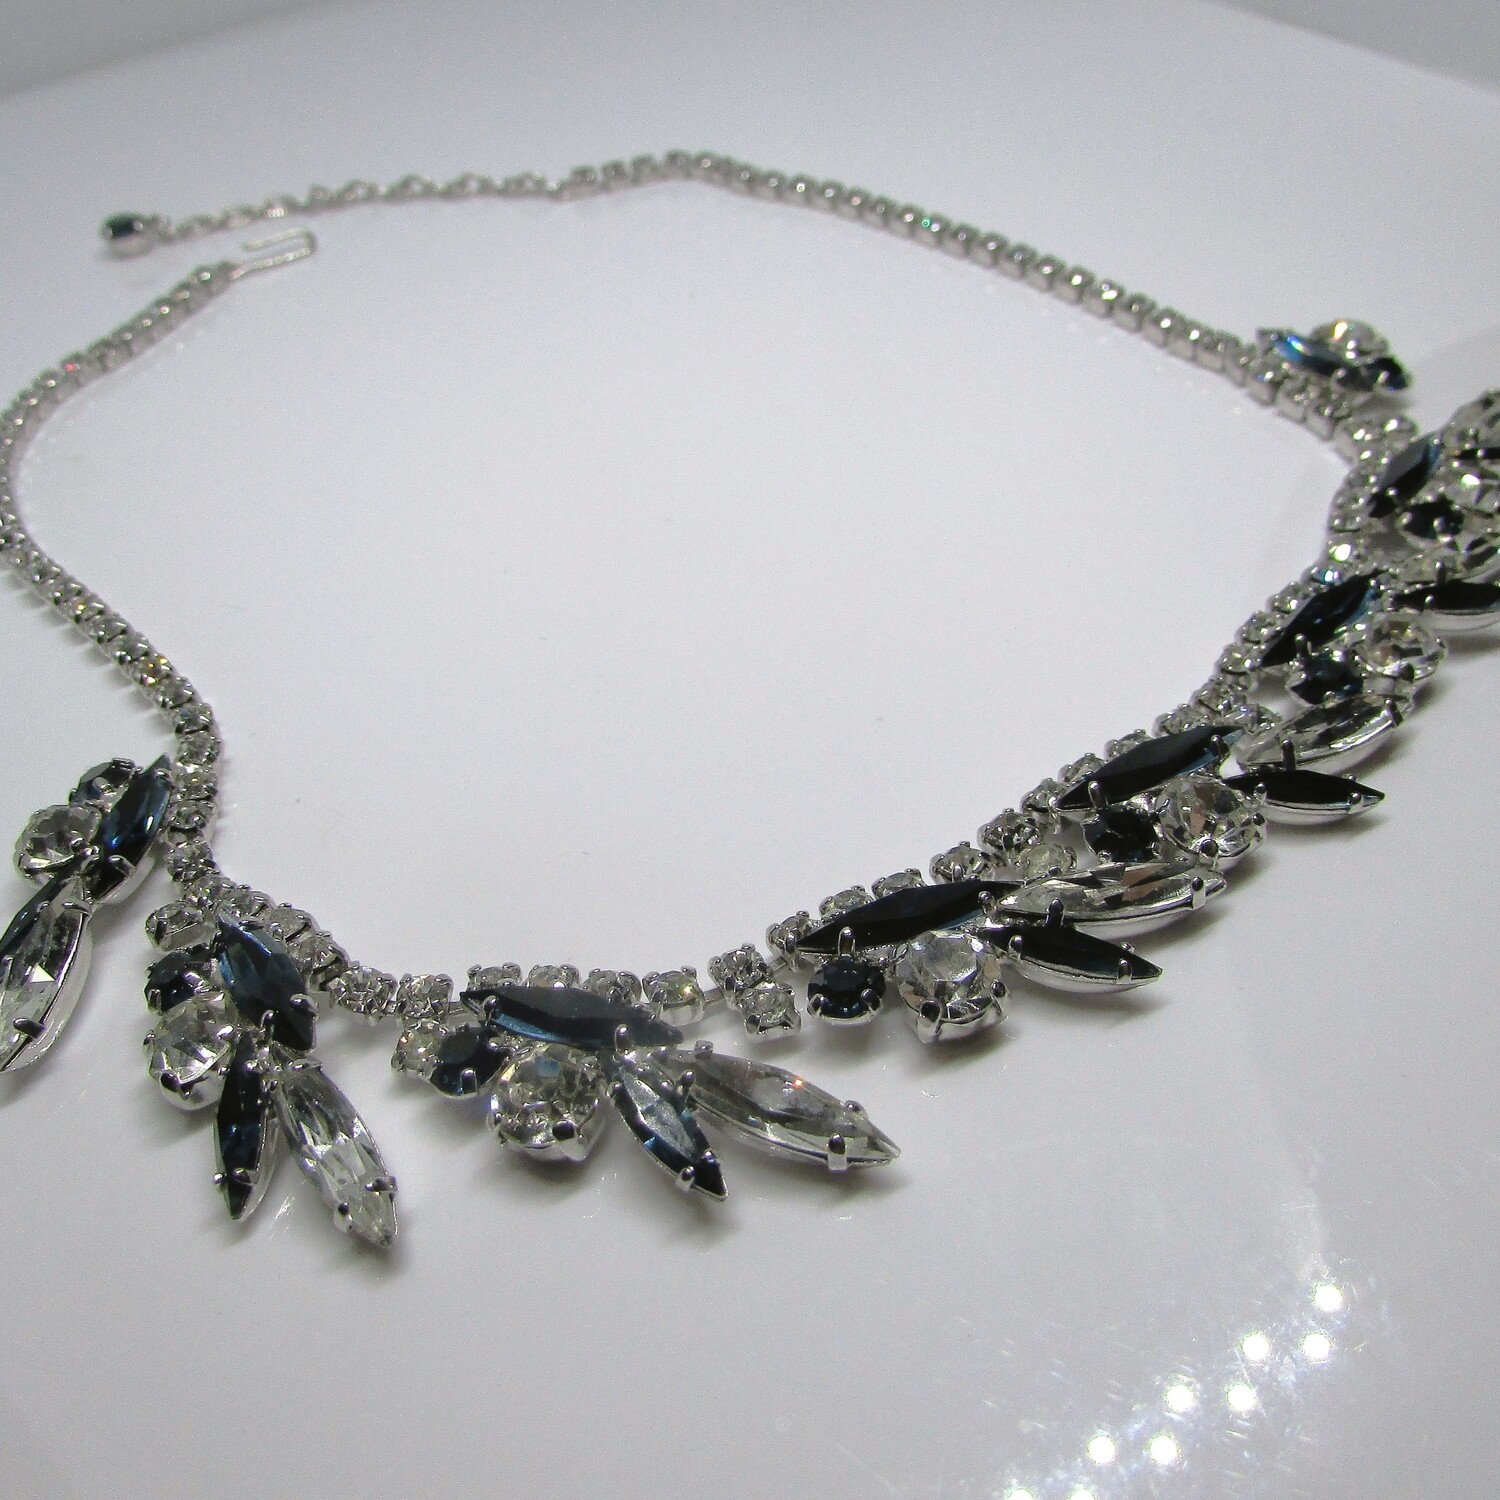 Vibrant  Sapphire Blue Marquise Cut Crystal Necklace c. 1920's